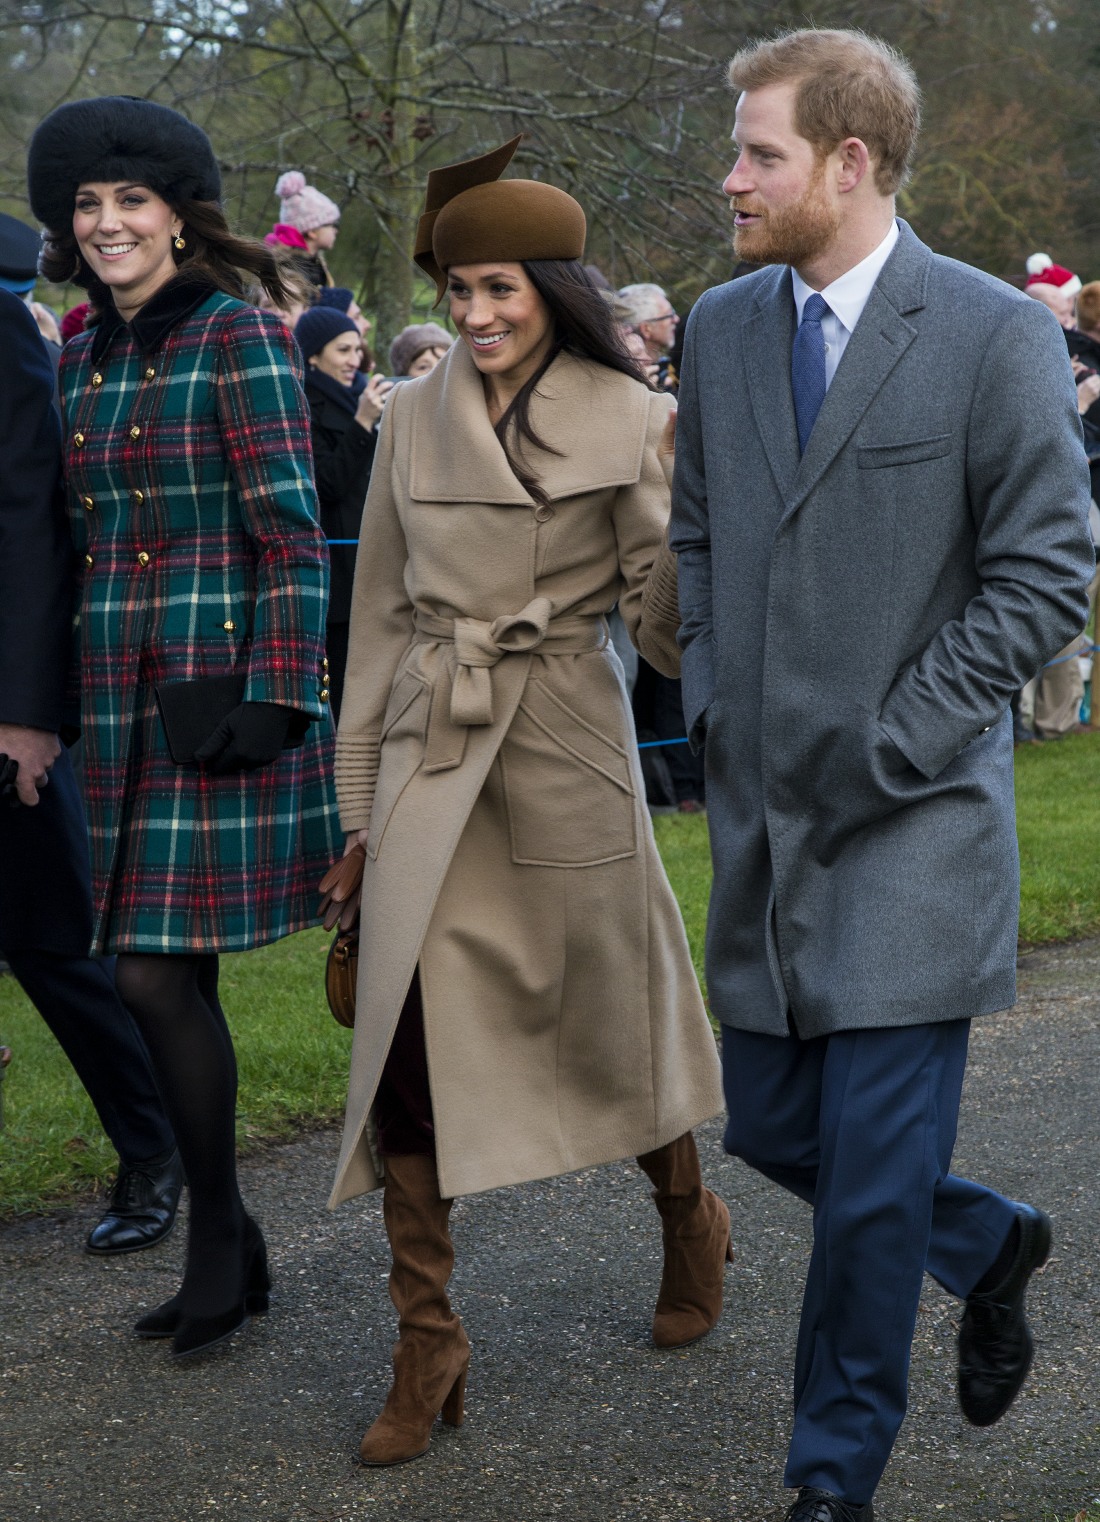 The British Royal family arrive at Sandringham to celebrate Christmas Day